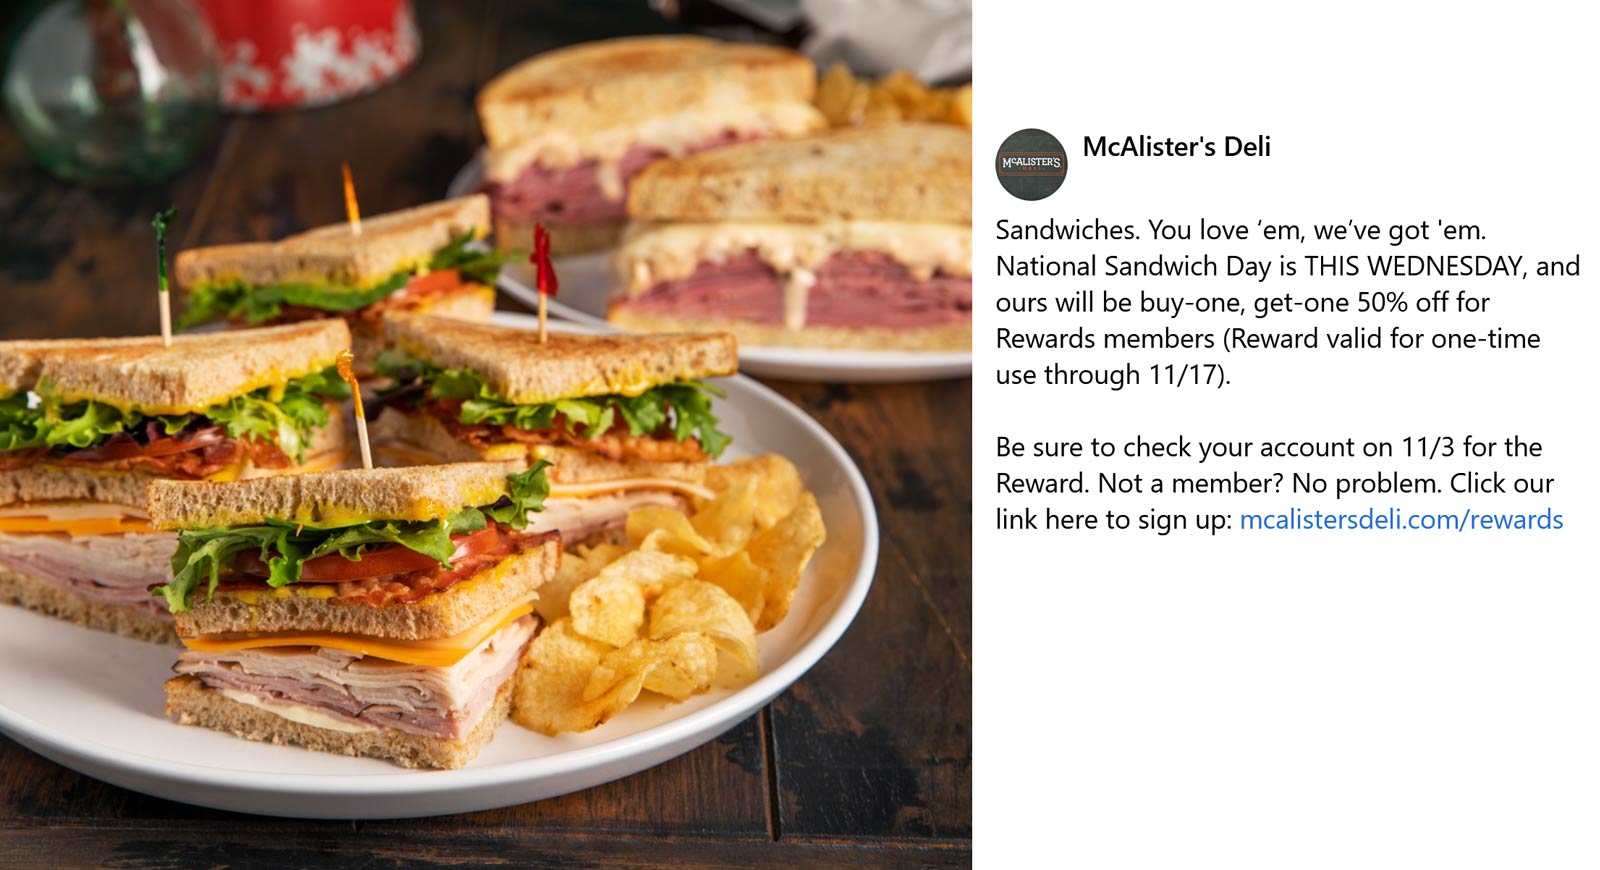 McAlisters Deli restaurants Coupon  Second sandwich 50% off today via rewards at McAlisters Deli #mcalistersdeli 